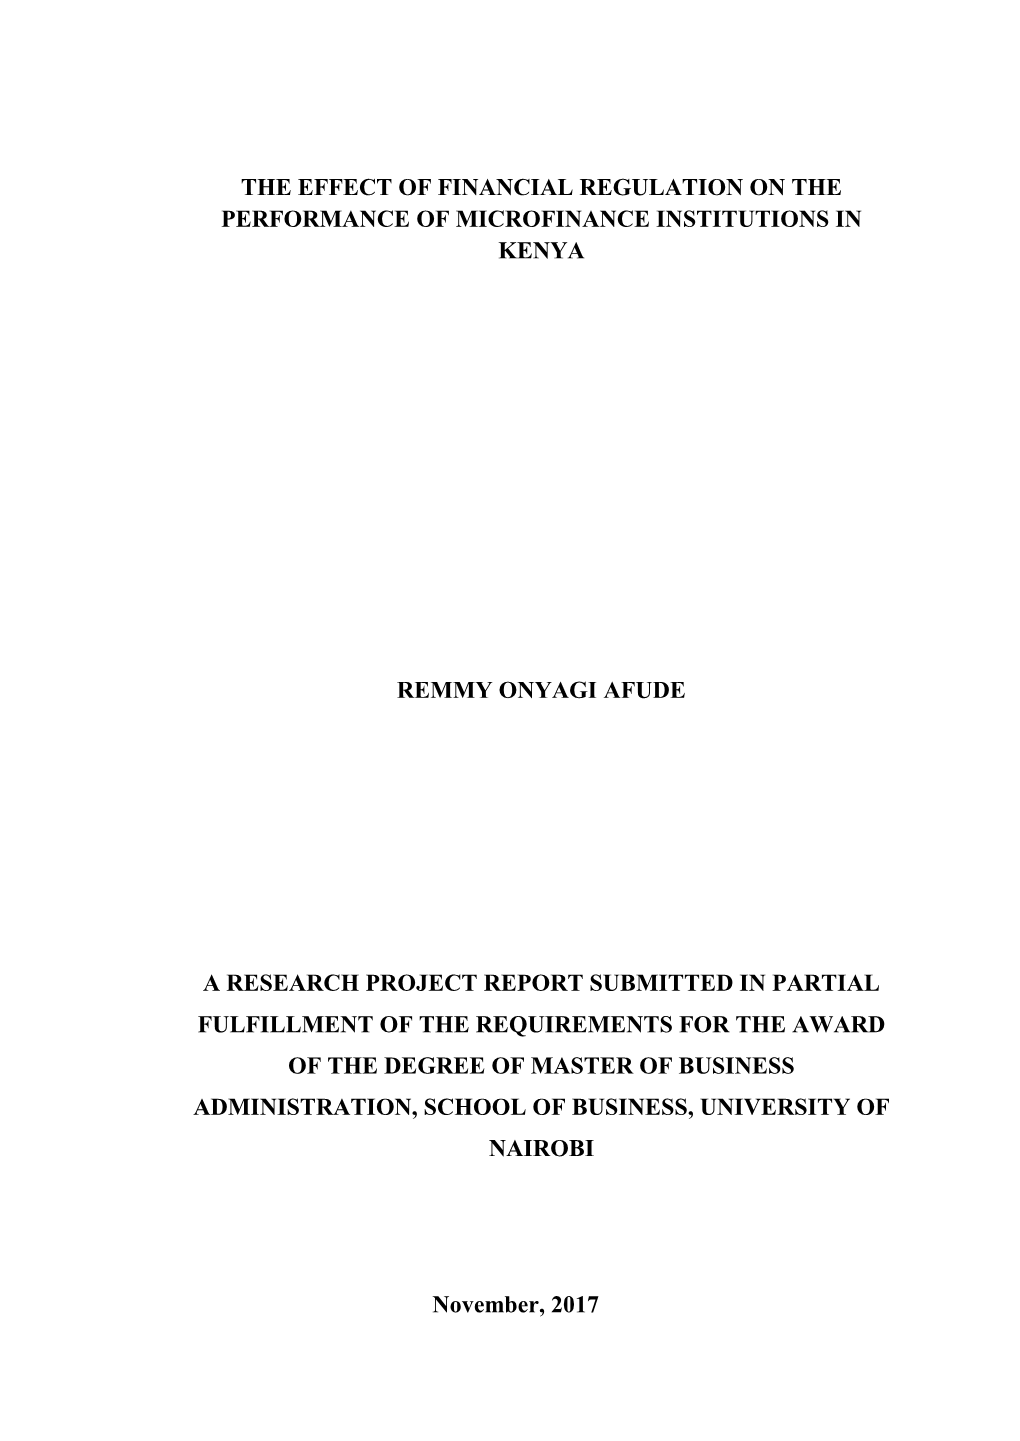 The Effect of Financial Regulation on the Performance of Microfinance Institutions in Kenya